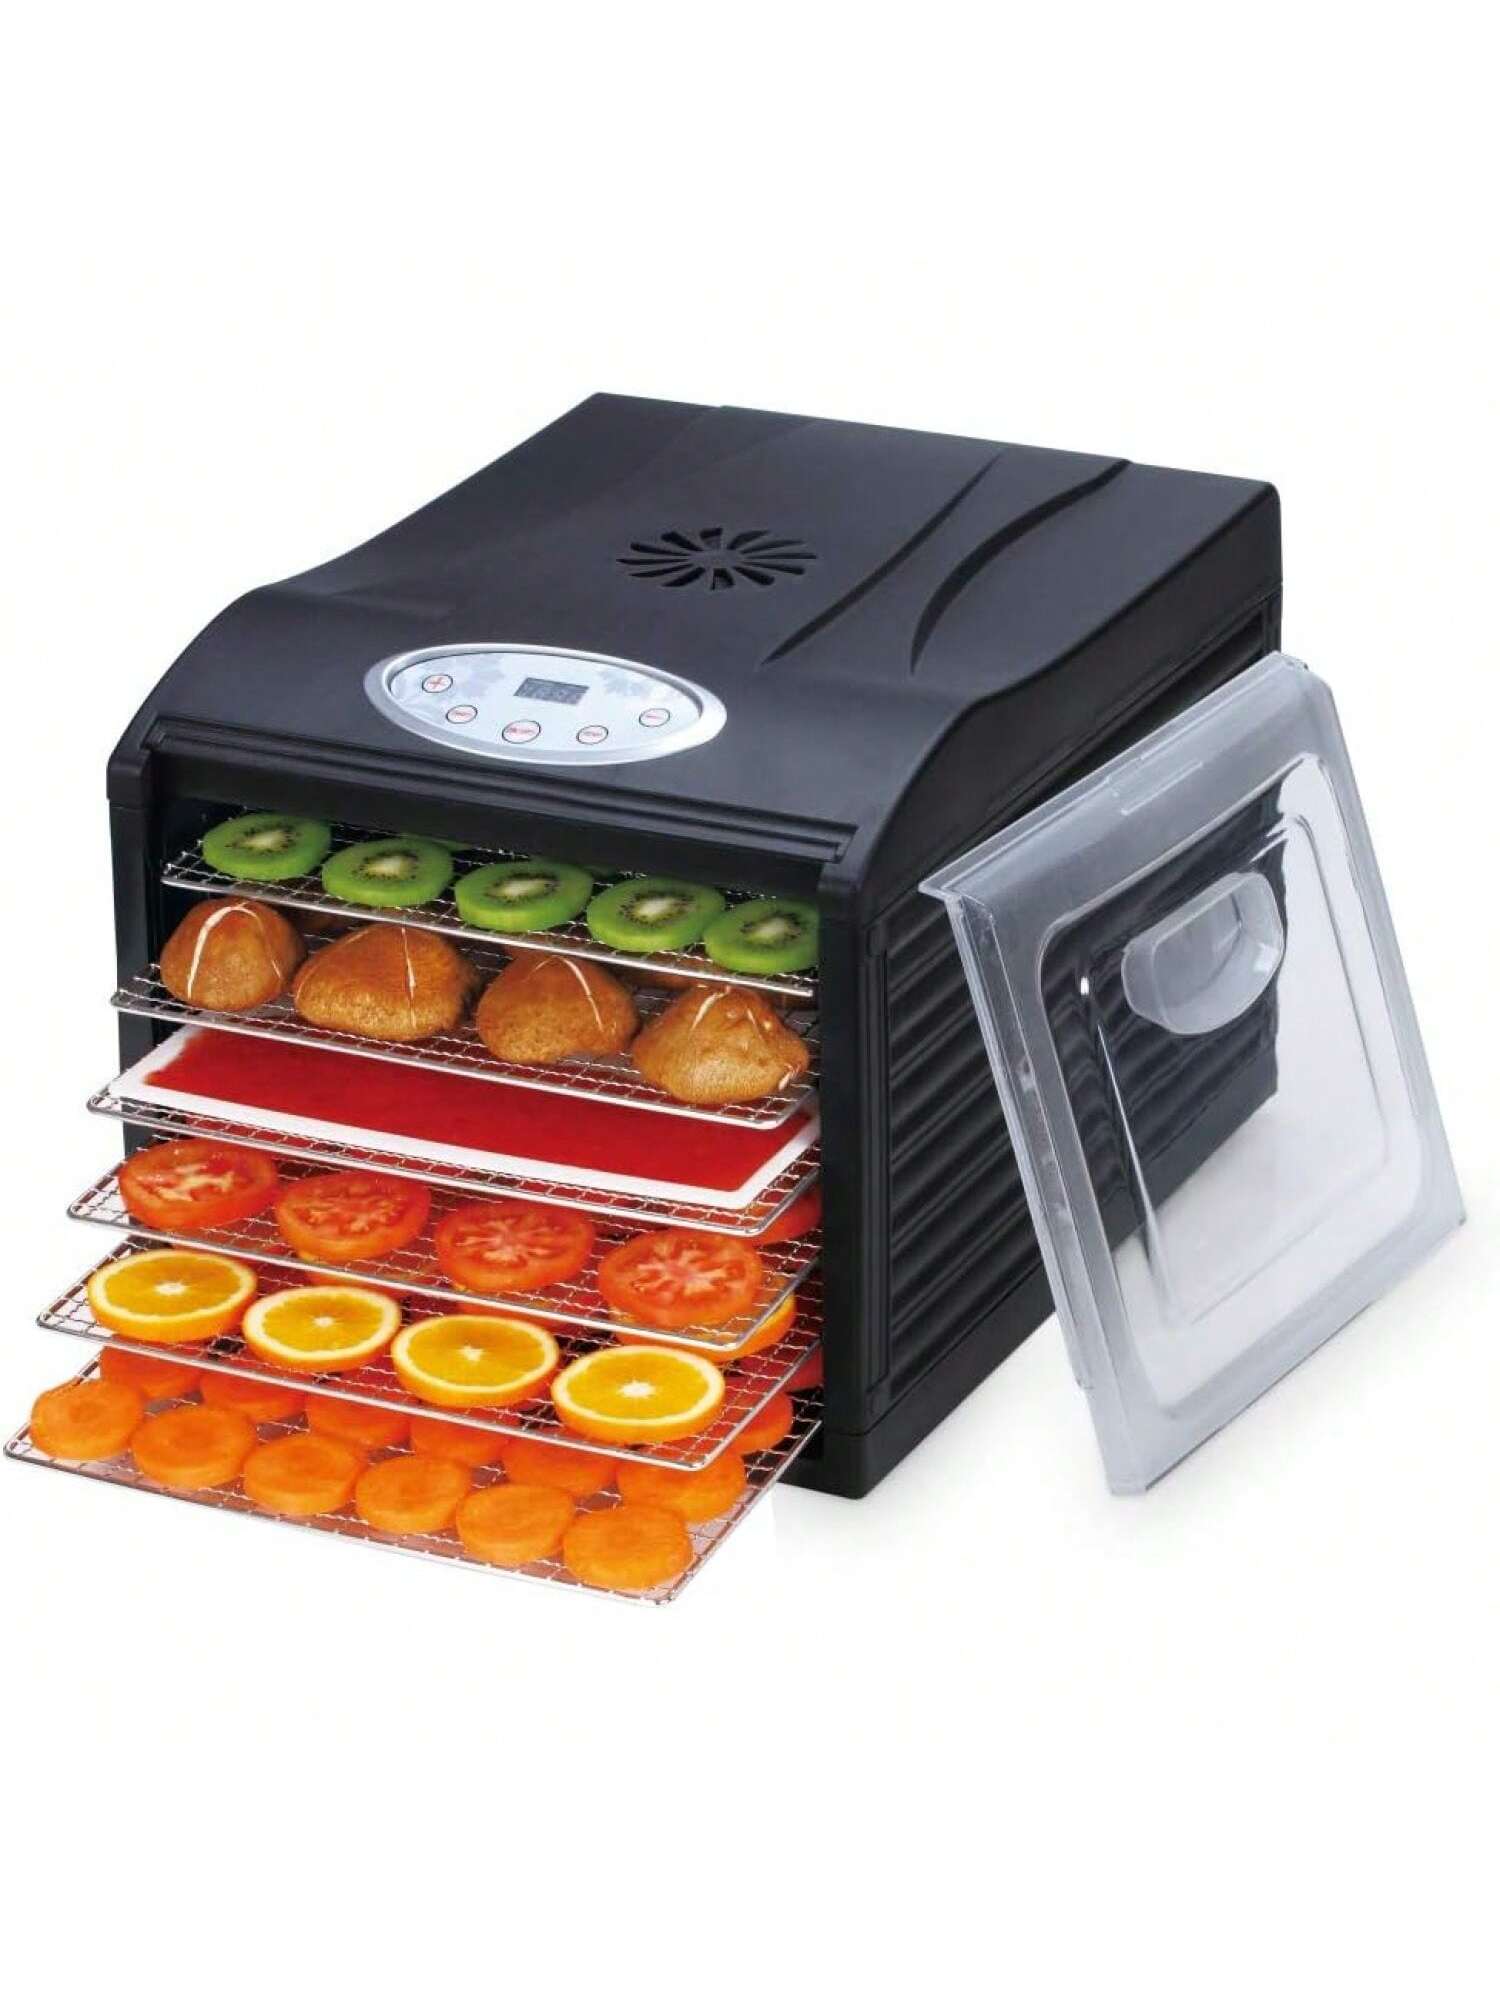 "Silent" Dehydrator with 6 STAINLESS STEEL Trays and Digital Timer and Temperature Control for Fruit, Vegetables, Jerky, s, Dog Treats, Fruit Leathers and More-Multicolor-2